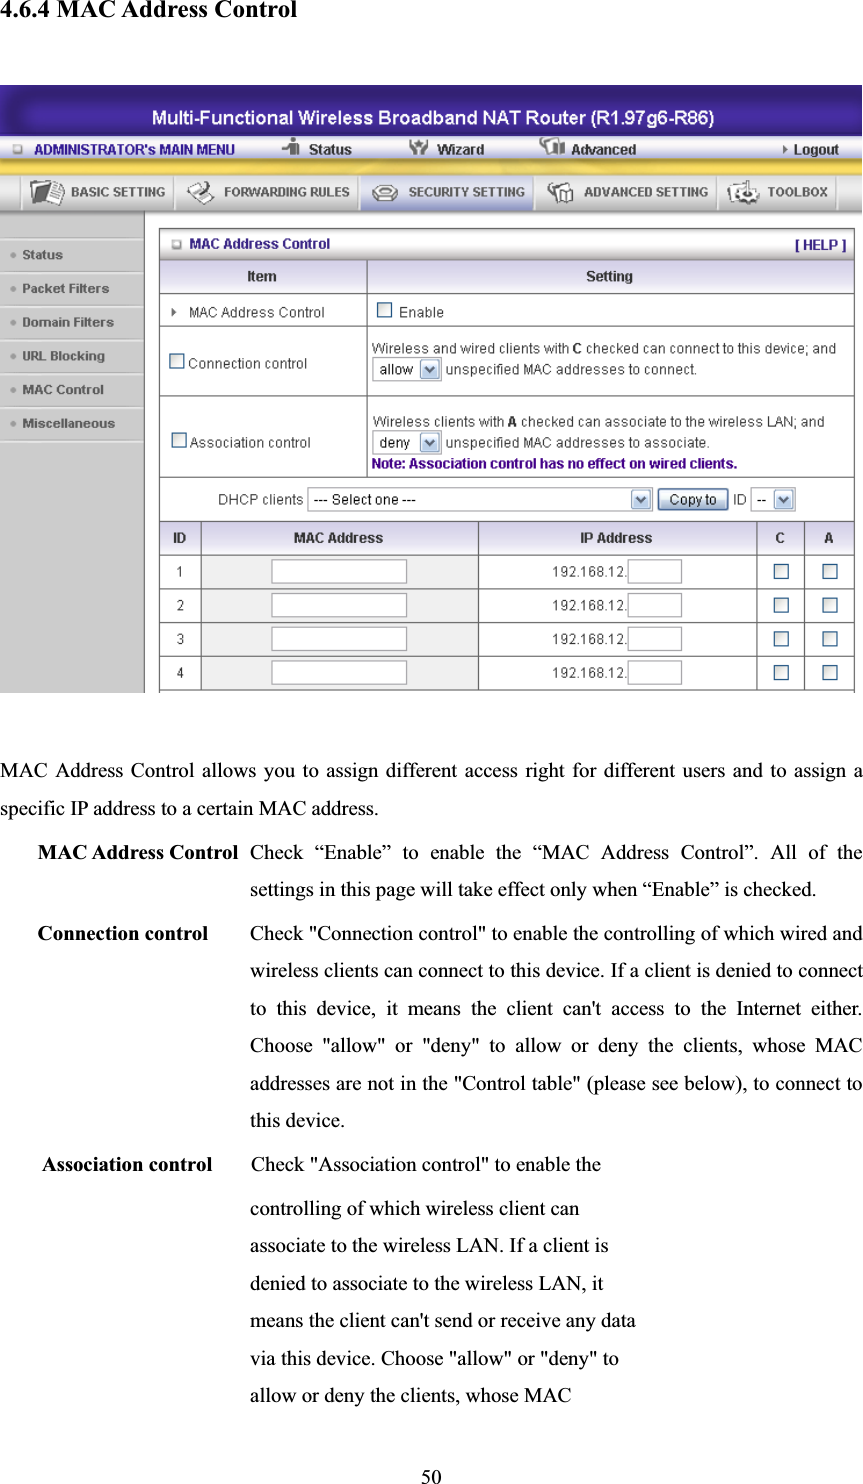 504.6.4 MAC Address Control MAC Address Control allows you to assign different access right for different users and to assign a specific IP address to a certain MAC address. MAC Address Control Check “Enable” to enable the “MAC Address Control”. All of the settings in this page will take effect only when “Enable” is checked. Connection control  Check &quot;Connection control&quot; to enable the controlling of which wired and wireless clients can connect to this device. If a client is denied to connect to this device, it means the client can&apos;t access to the Internet either. Choose &quot;allow&quot; or &quot;deny&quot; to allow or deny the clients, whose MAC addresses are not in the &quot;Control table&quot; (please see below), to connect to this device. Association control  Check &quot;Association control&quot; to enable the controlling of which wireless client can associate to the wireless LAN. If a client is denied to associate to the wireless LAN, it means the client can&apos;t send or receive any data via this device. Choose &quot;allow&quot; or &quot;deny&quot; to allow or deny the clients, whose MAC 